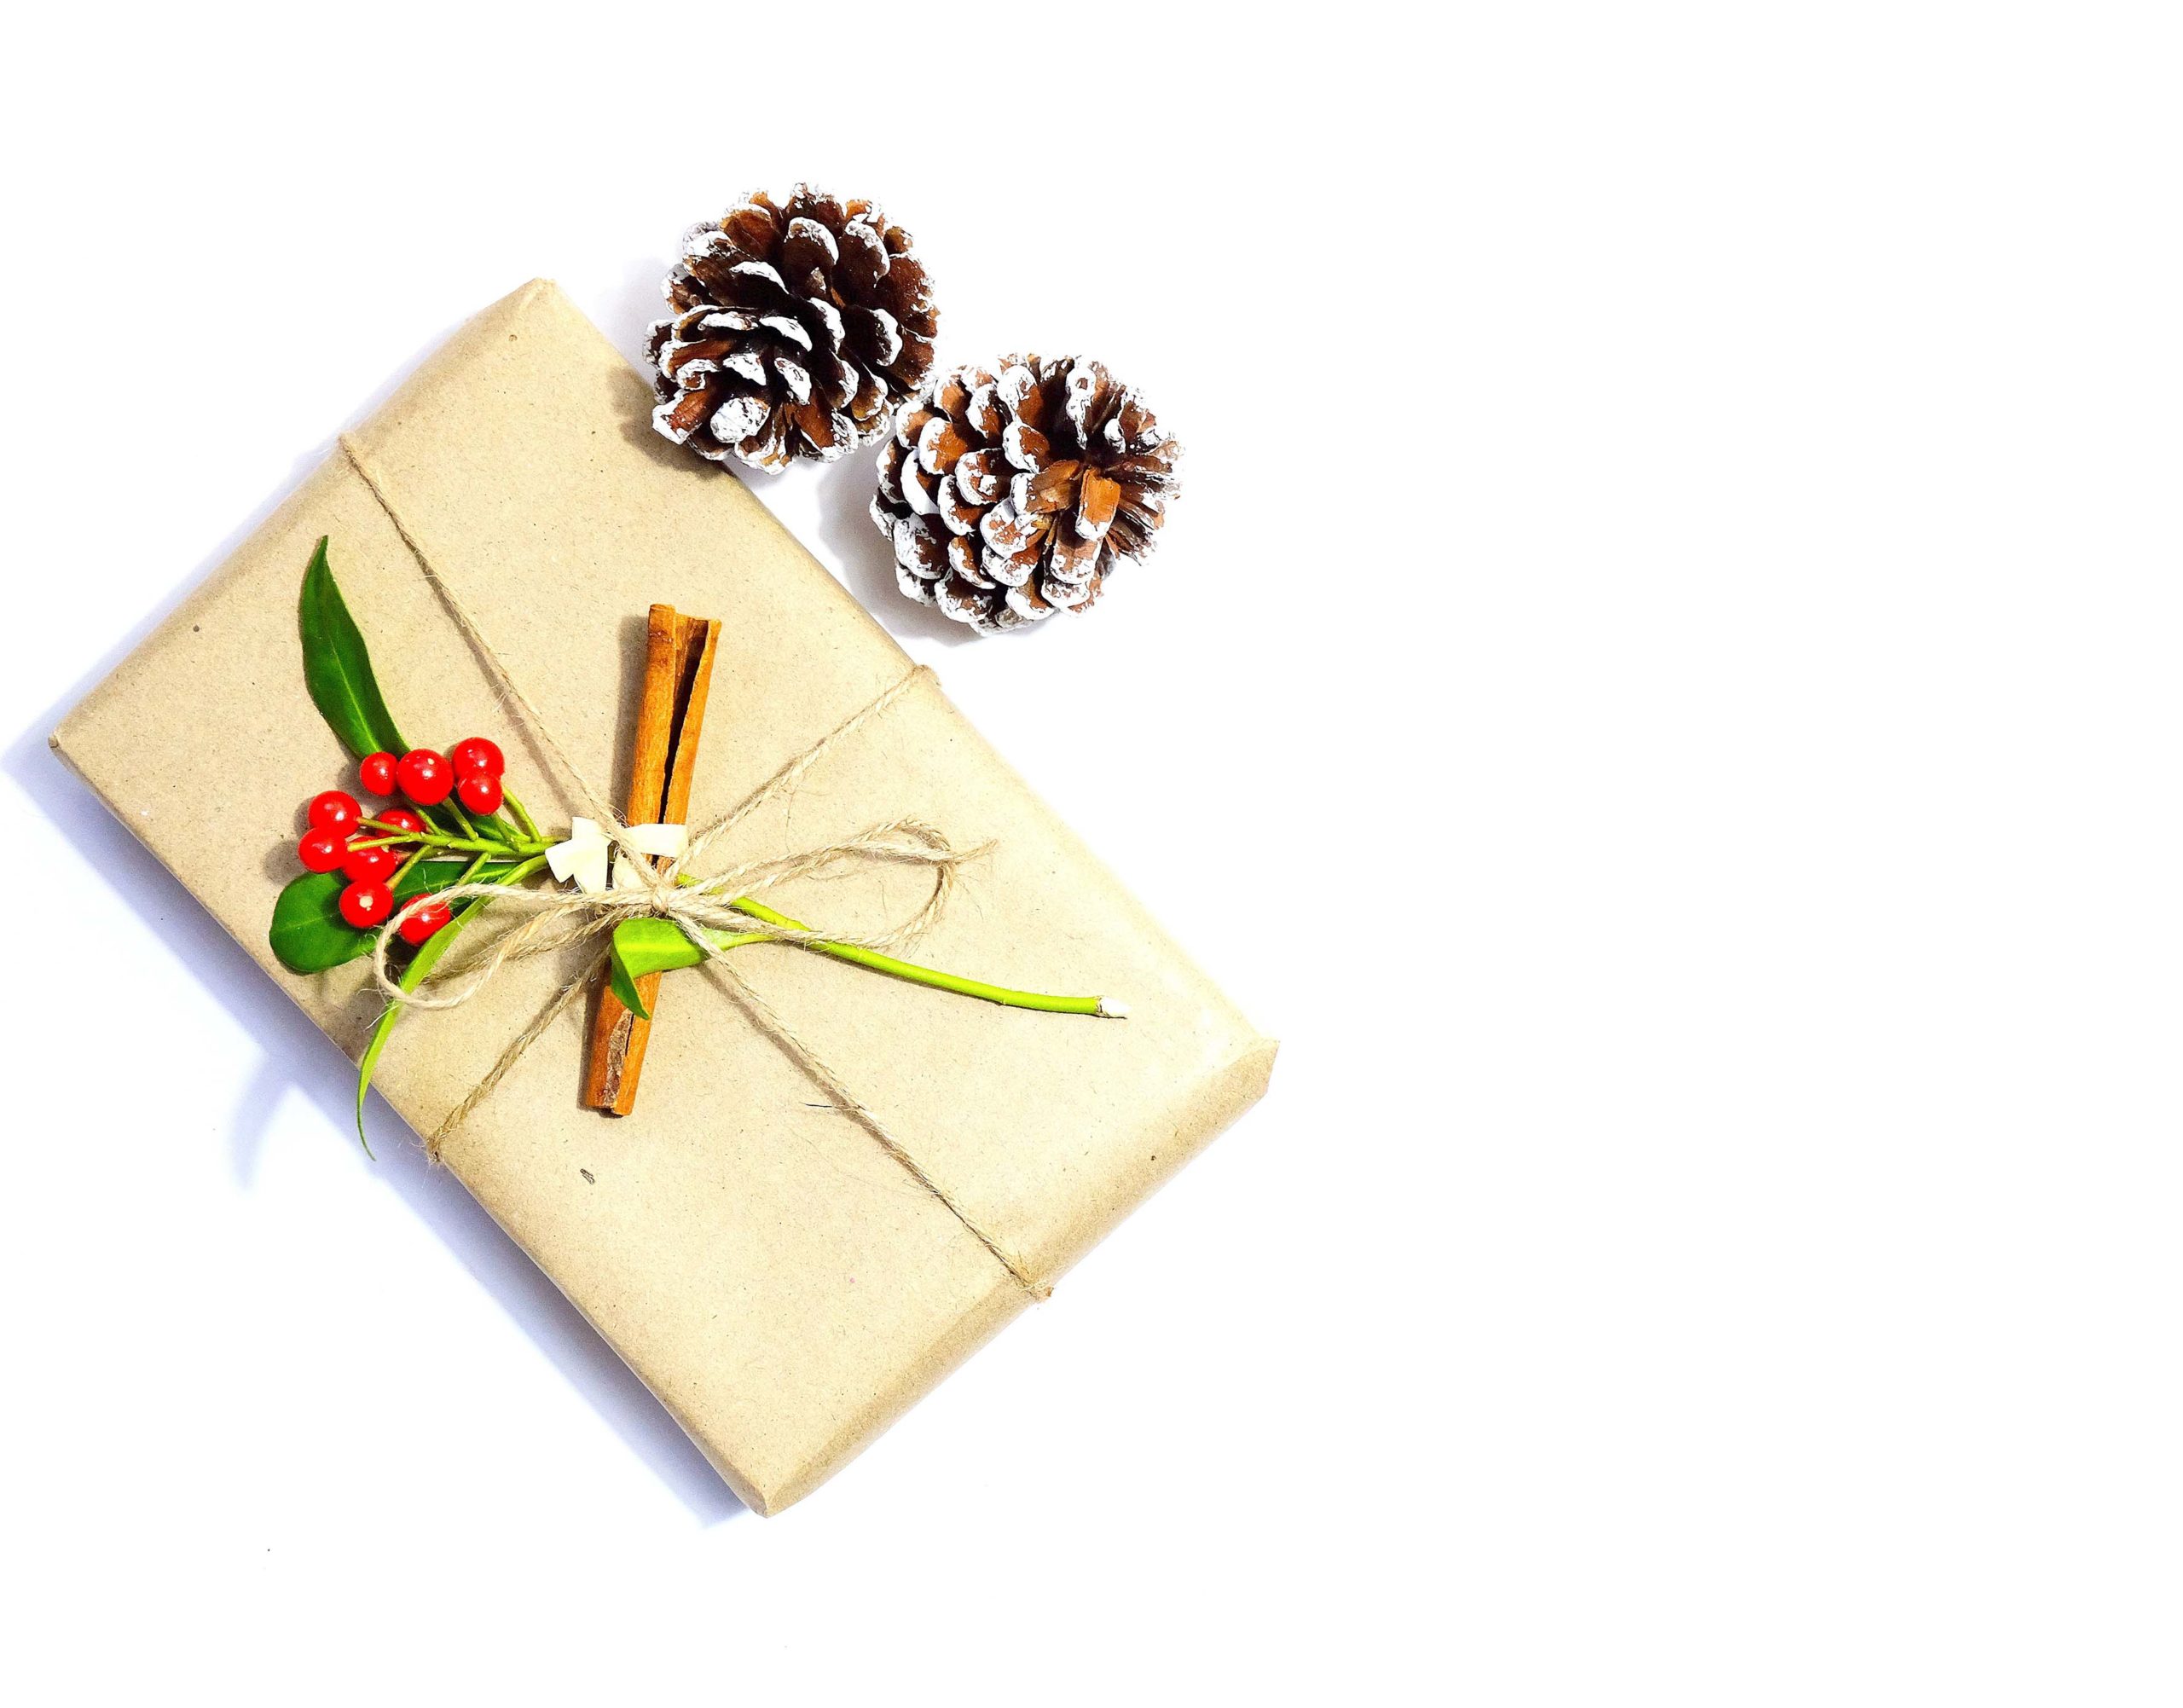 The Benefits of Gift-Giving for Your Business This Holiday Season